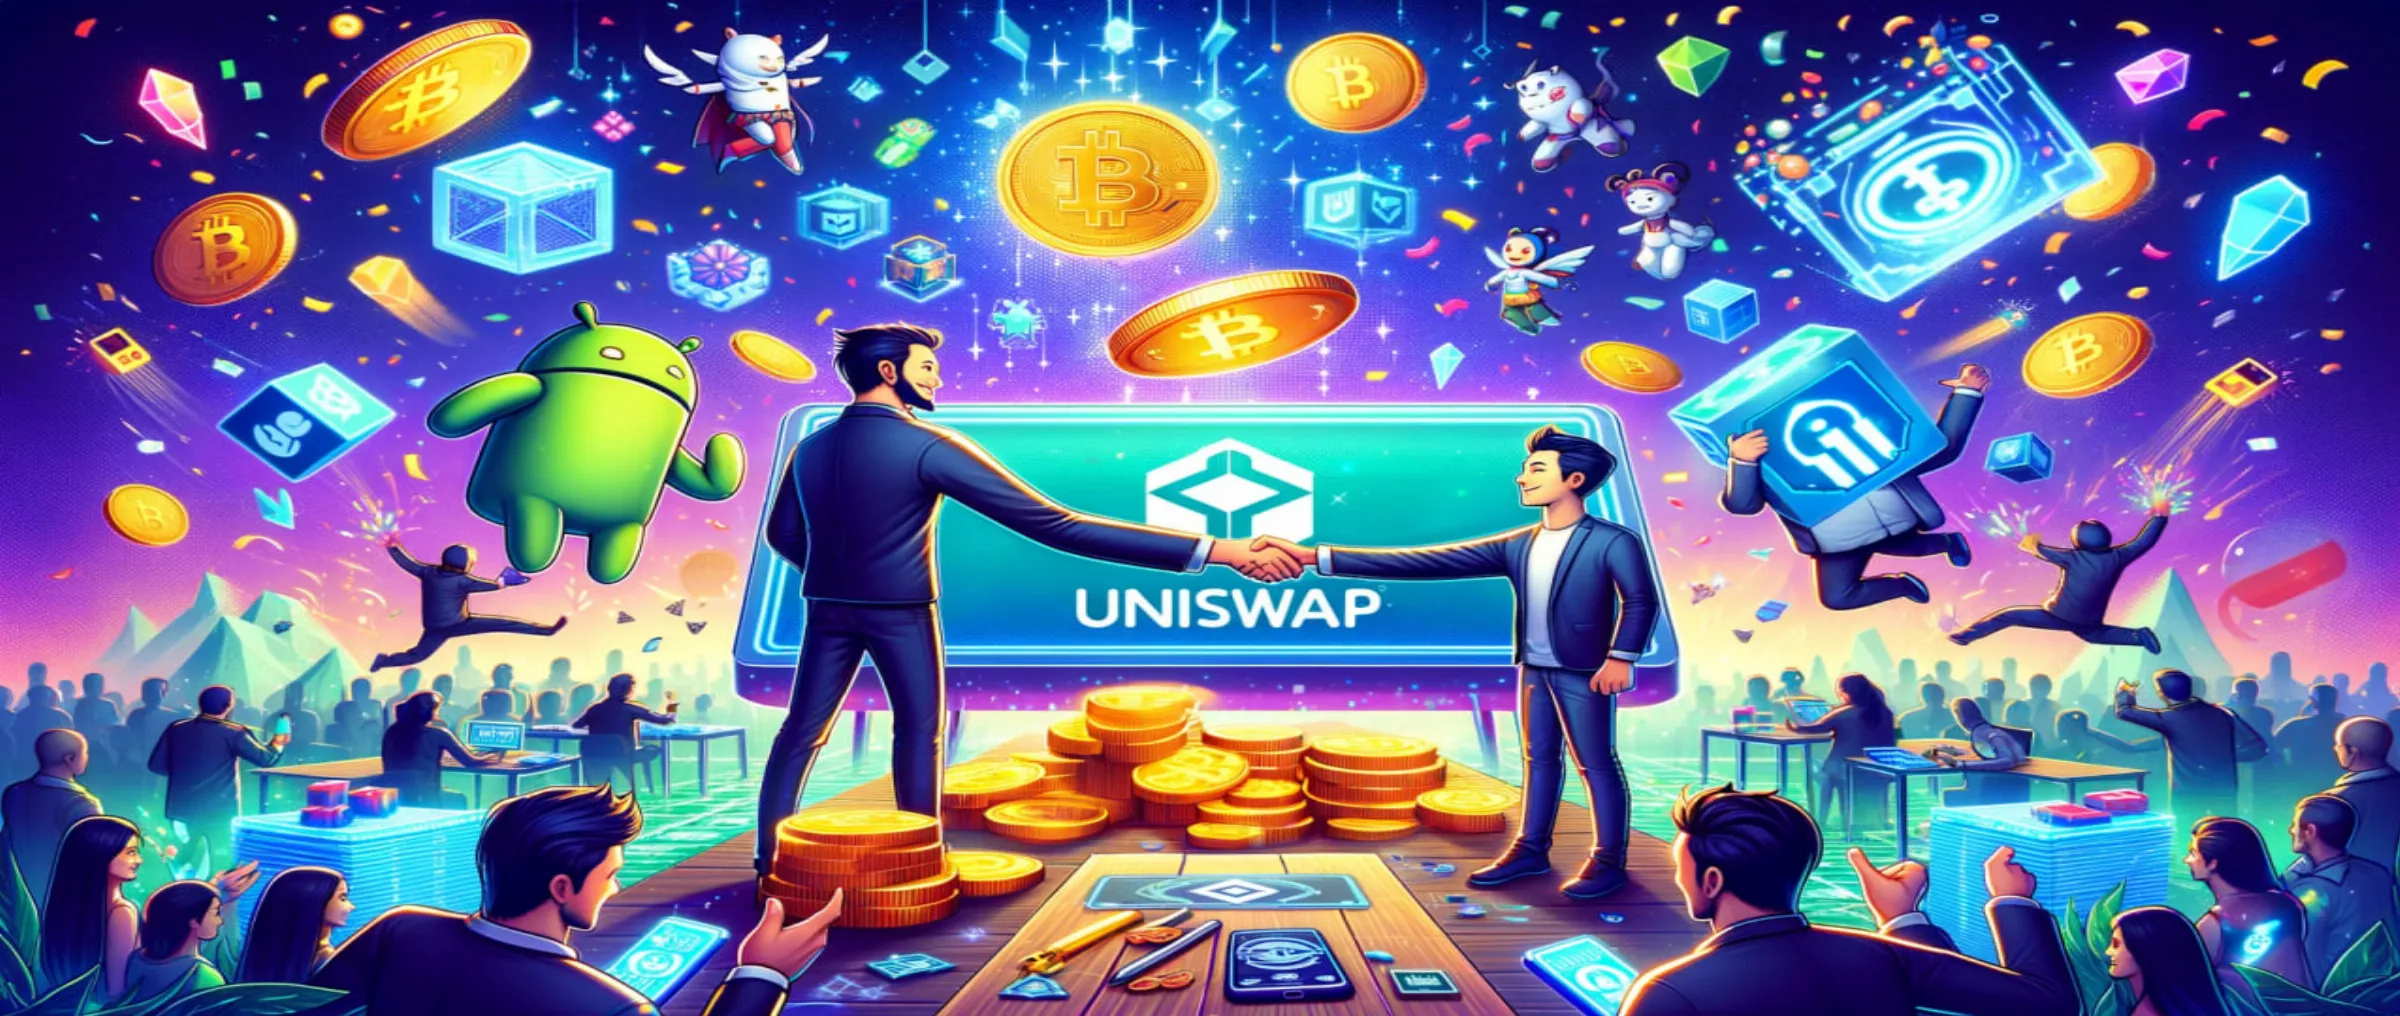 Uniswap acquires Crypto: The Game, merging DeFi and gaming